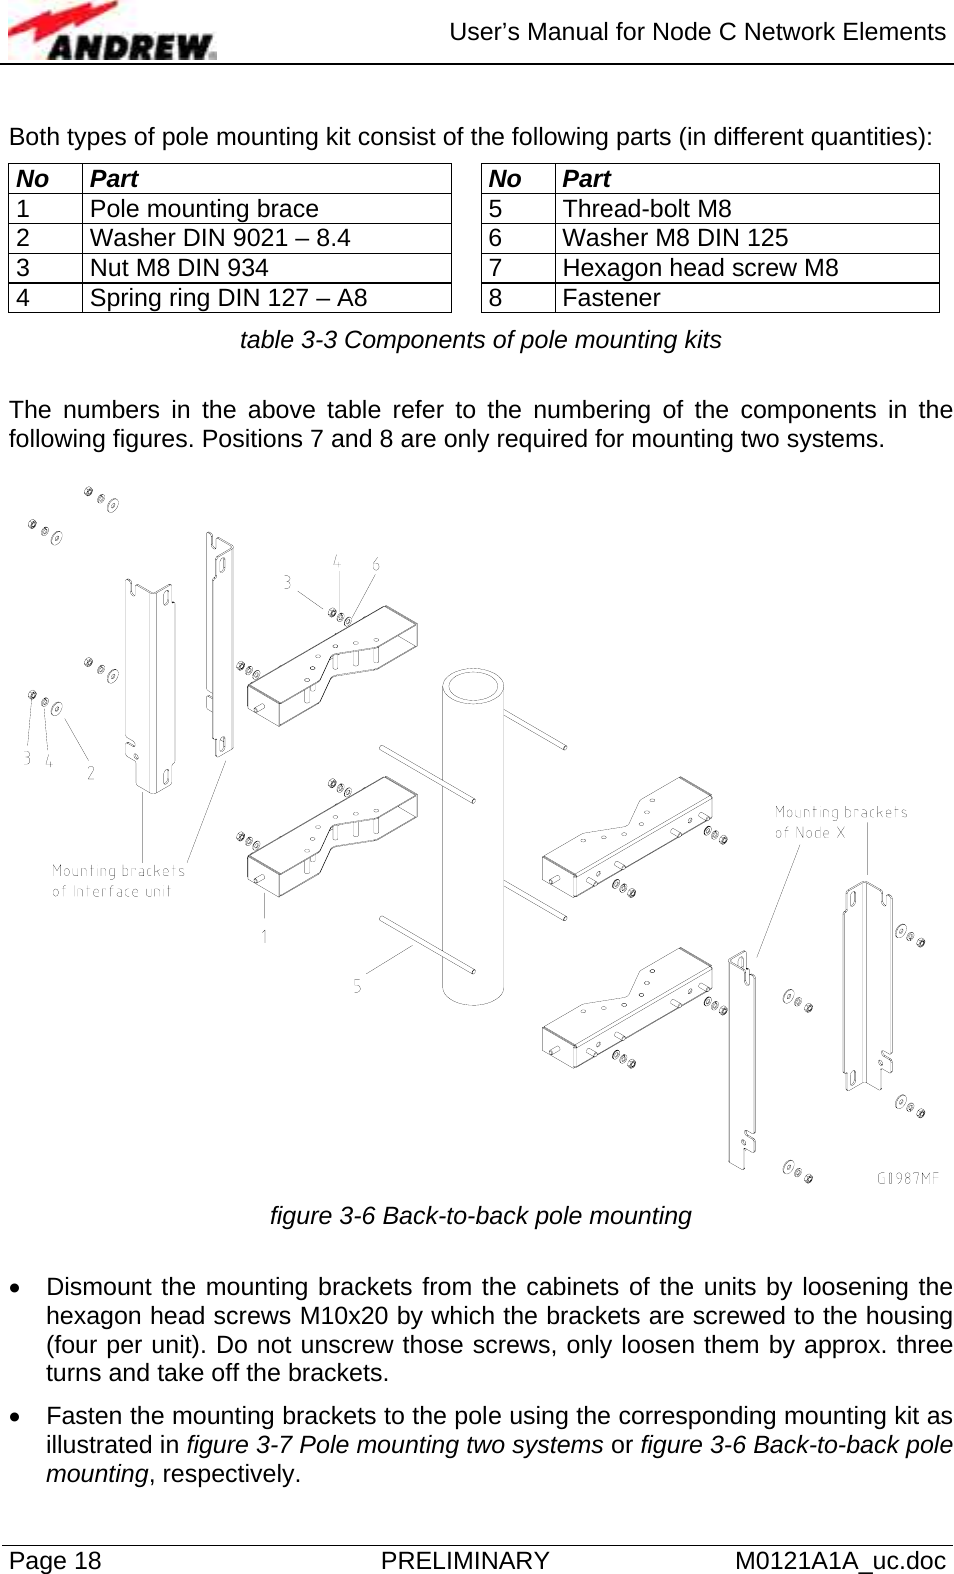  User’s Manual for Node C Network Elements Page 18  PRELIMINARY M0121A1A_uc.doc  Both types of pole mounting kit consist of the following parts (in different quantities):  No Part  No  Part 1  Pole mounting brace    5  Thread-bolt M8 2  Washer DIN 9021 – 8.4    6  Washer M8 DIN 125 3  Nut M8 DIN 934    7  Hexagon head screw M8 4  Spring ring DIN 127 – A8    8  Fastener table 3-3 Components of pole mounting kits  The numbers in the above table refer to the numbering of the components in the following figures. Positions 7 and 8 are only required for mounting two systems.   figure 3-6 Back-to-back pole mounting  •  Dismount the mounting brackets from the cabinets of the units by loosening the hexagon head screws M10x20 by which the brackets are screwed to the housing (four per unit). Do not unscrew those screws, only loosen them by approx. three turns and take off the brackets. •  Fasten the mounting brackets to the pole using the corresponding mounting kit as illustrated in figure 3-7 Pole mounting two systems or figure 3-6 Back-to-back pole mounting, respectively. 